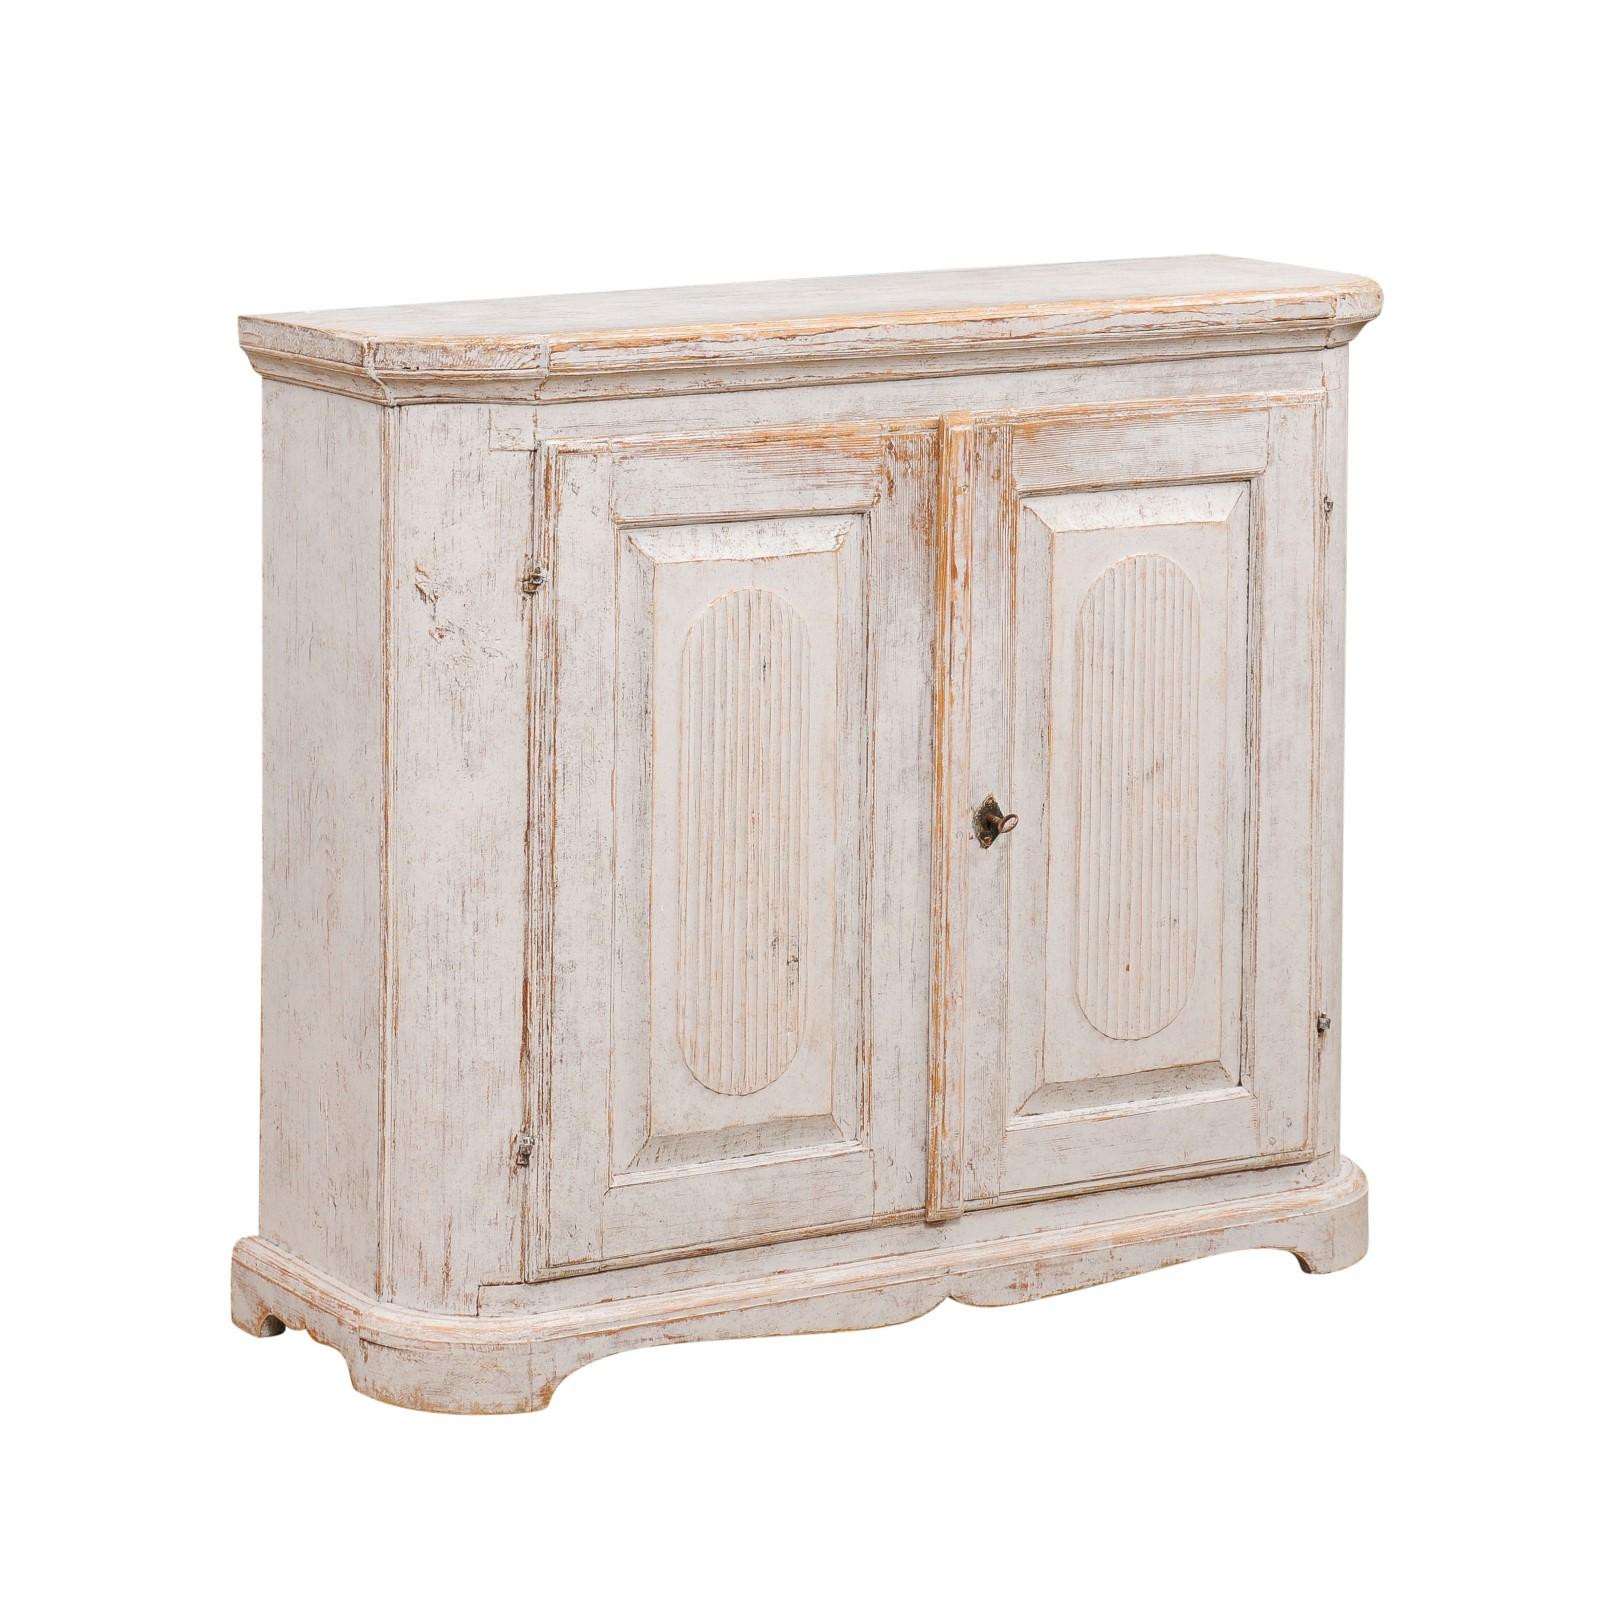 A Swedish late Gustavian period painted wood buffet from the early 19th century, with canted sides, two doors, reeded panels and weathered patina. Created in Sweden during the first quarter of the 19th century, this painted buffet features a